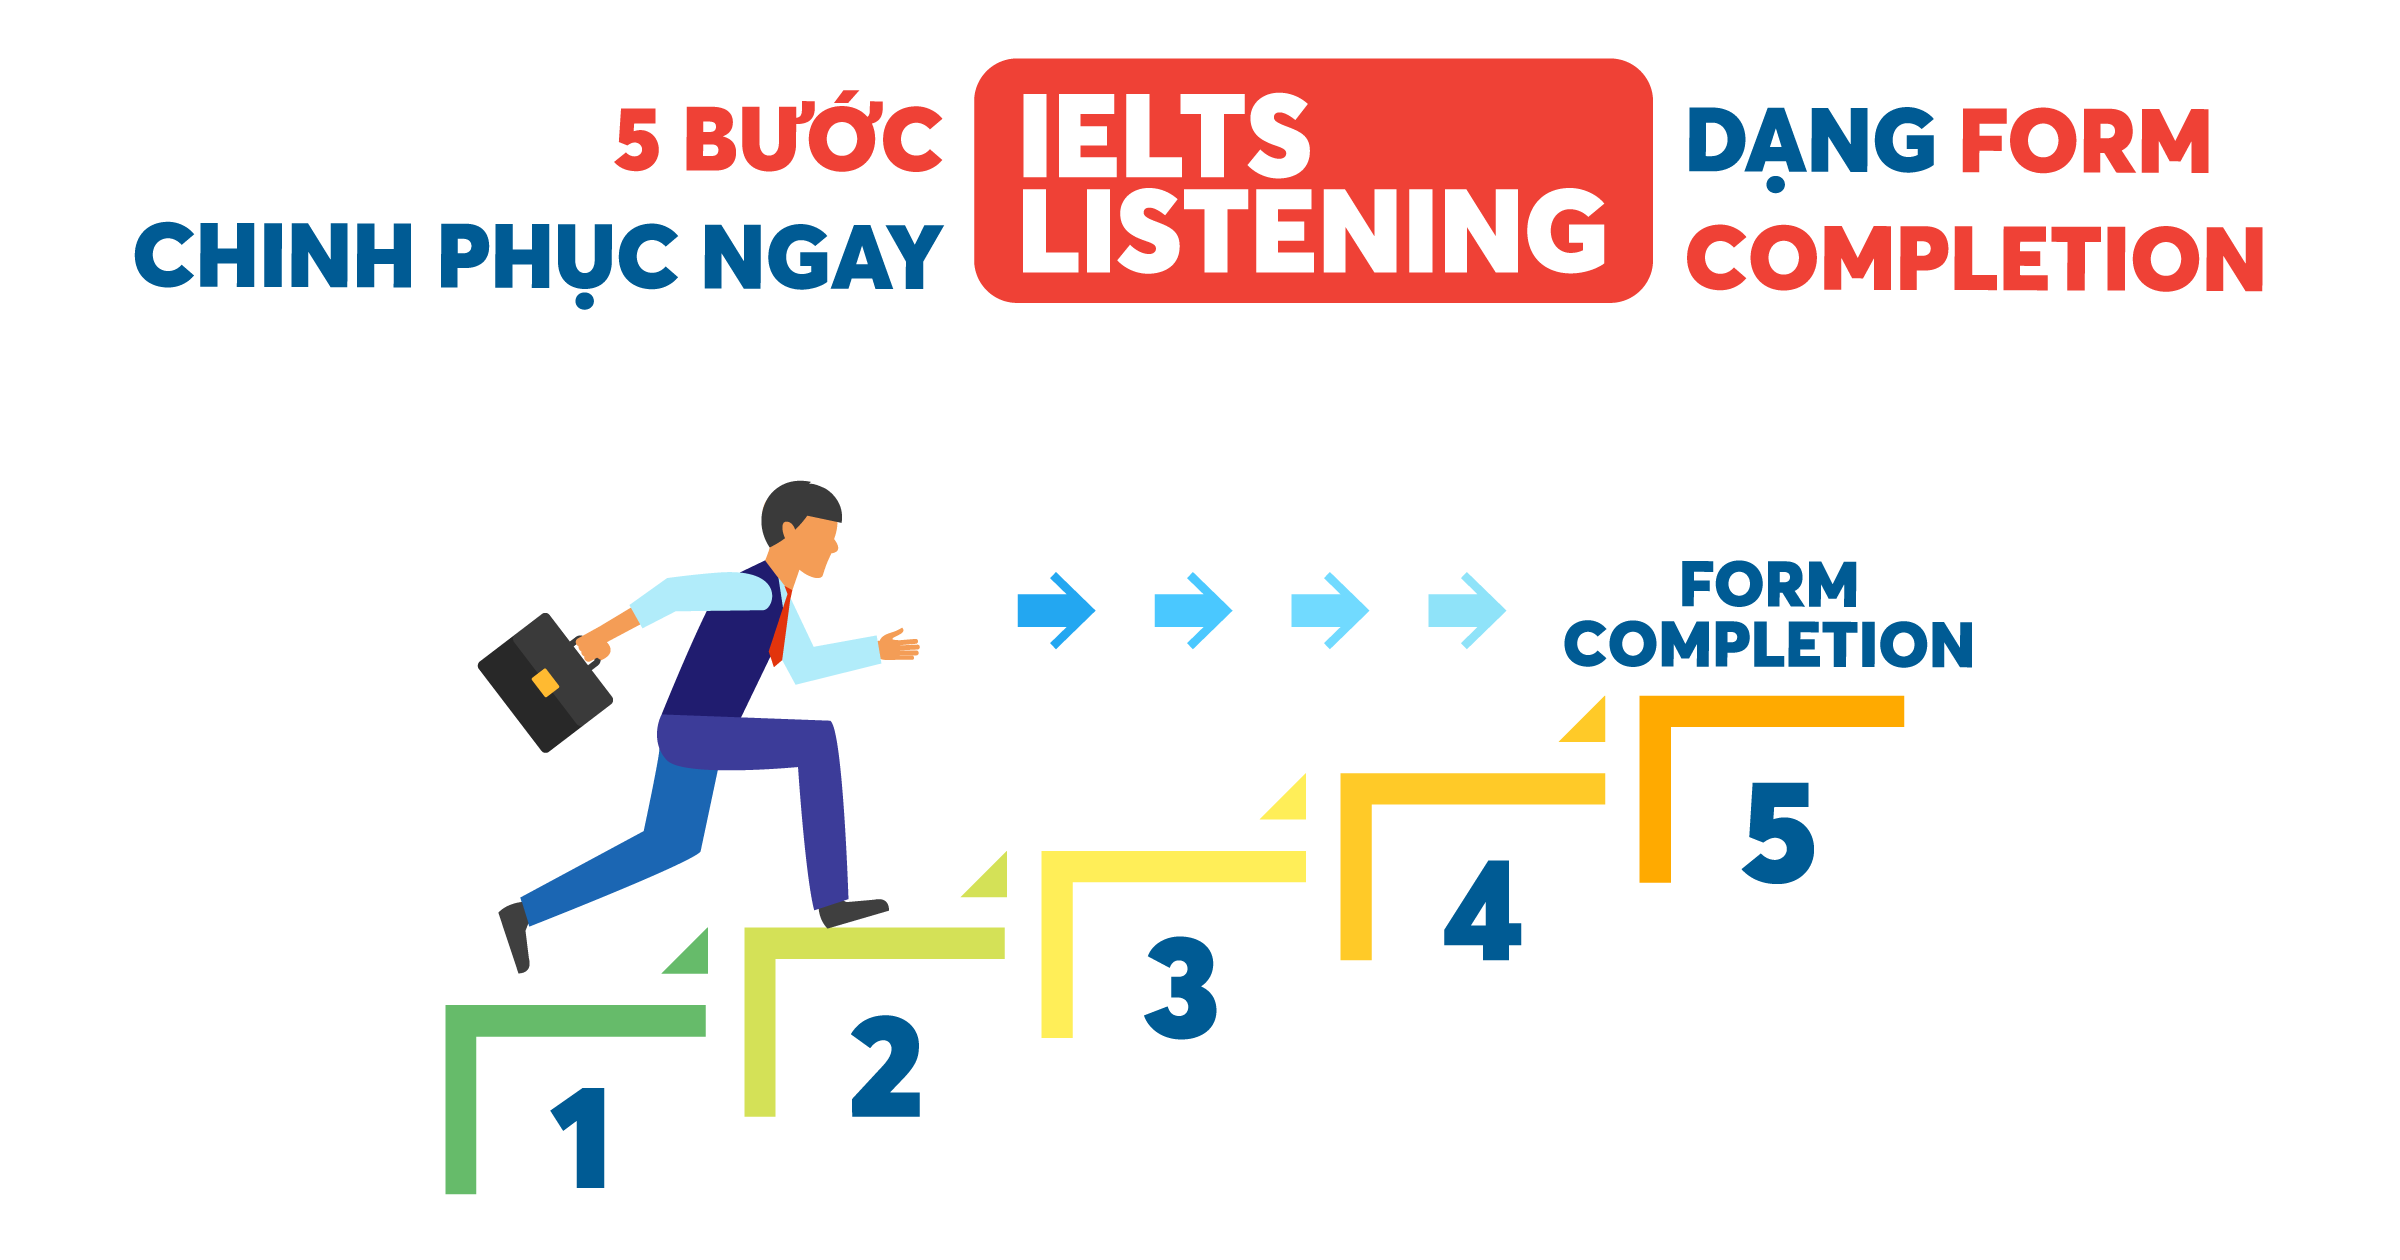 5-b-c-chinh-ph-c-ngay-ielts-listening-d-ng-form-completion